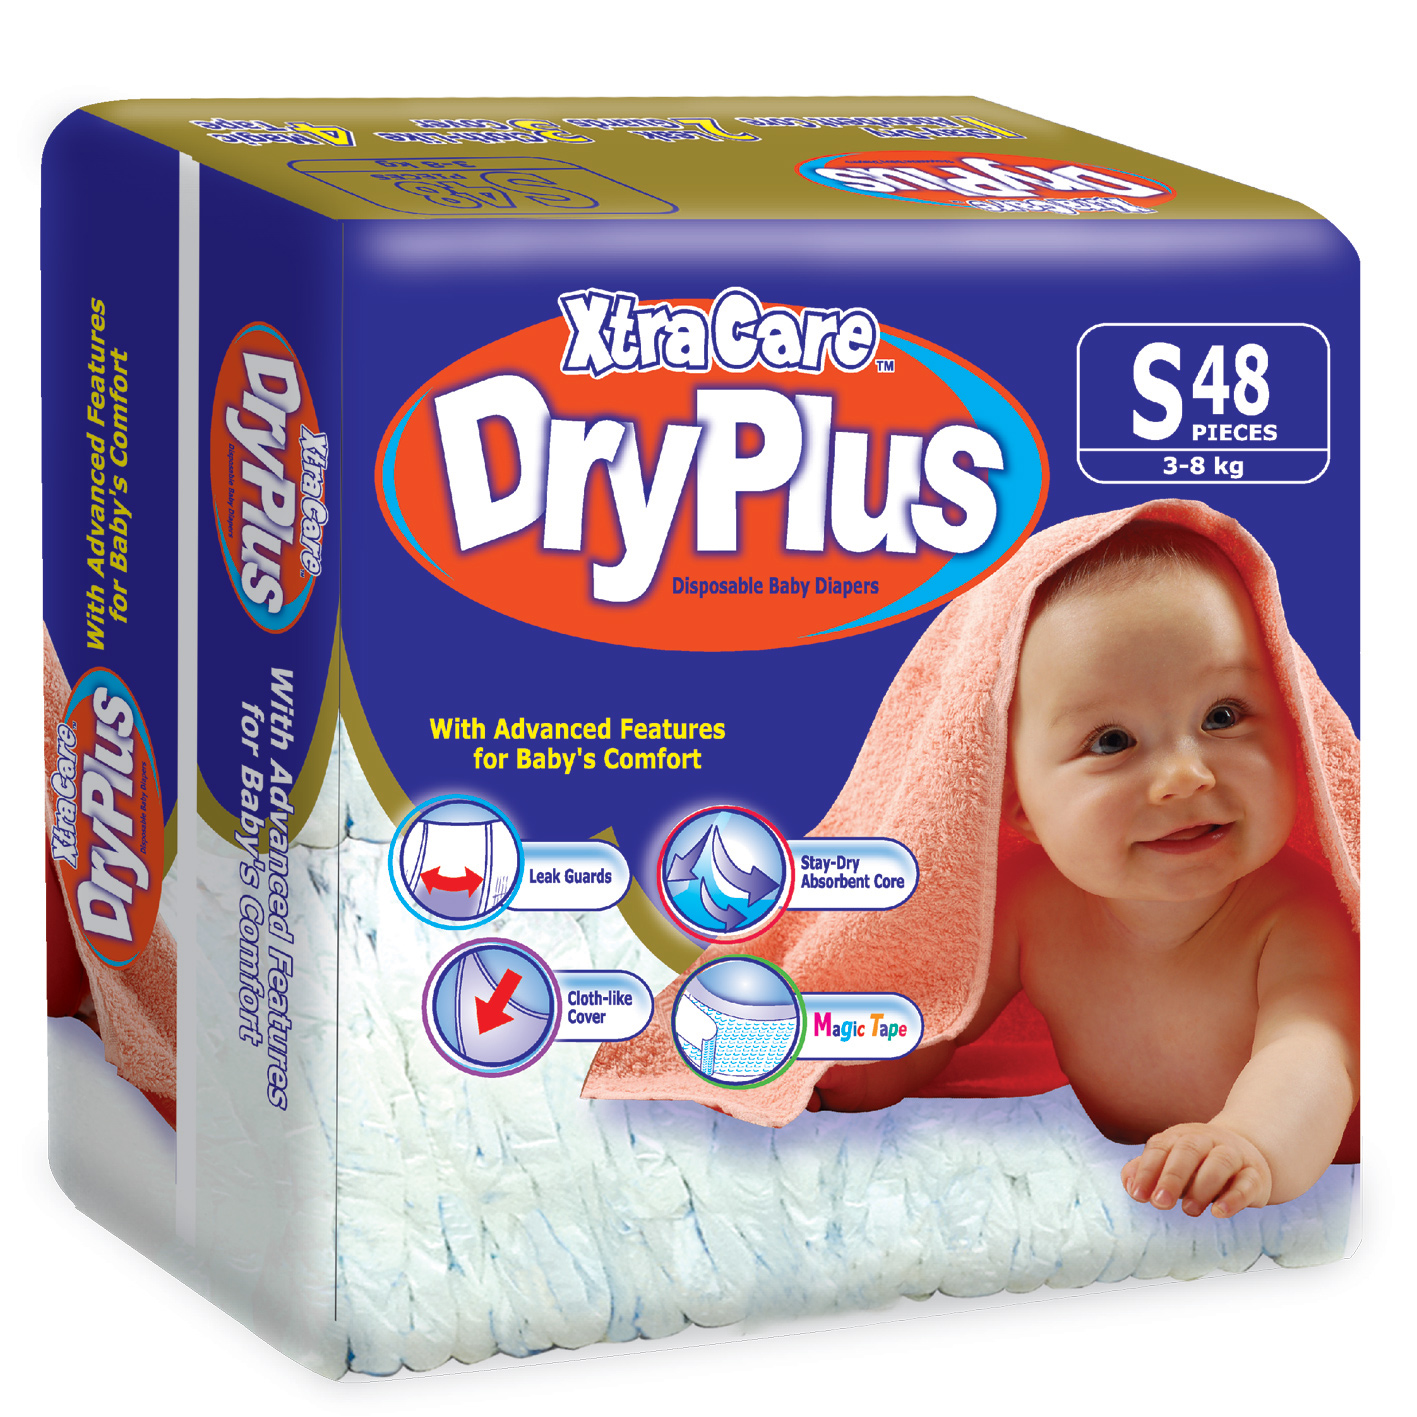 Xtra Care Dry Plus - Disposable Baby Diapers